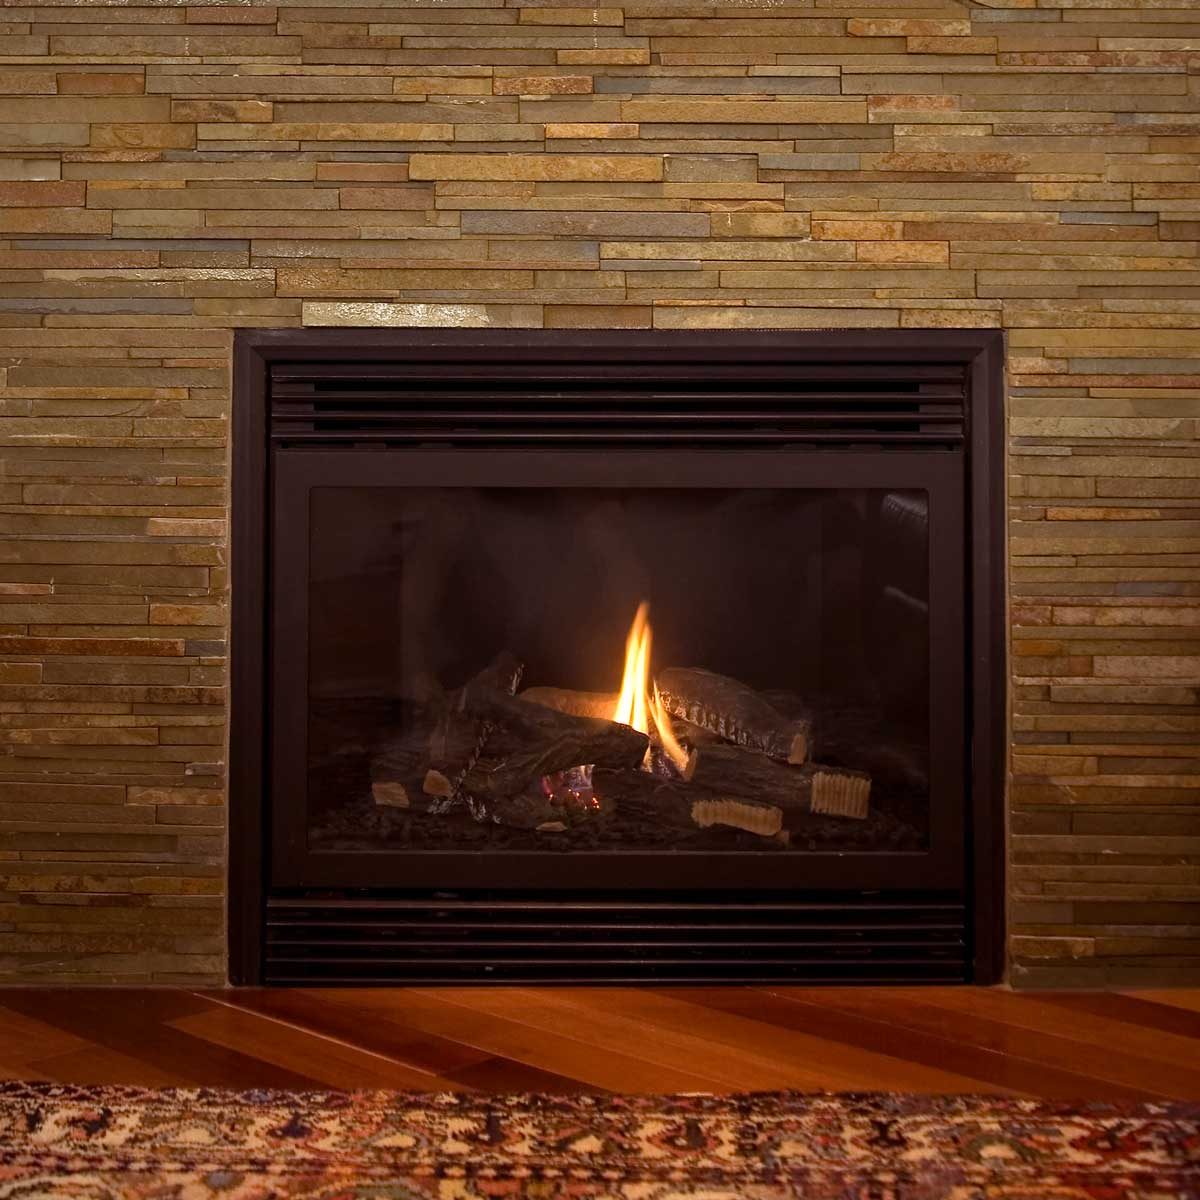 A Handy Guide to the 8 Types of Gas Fireplaces